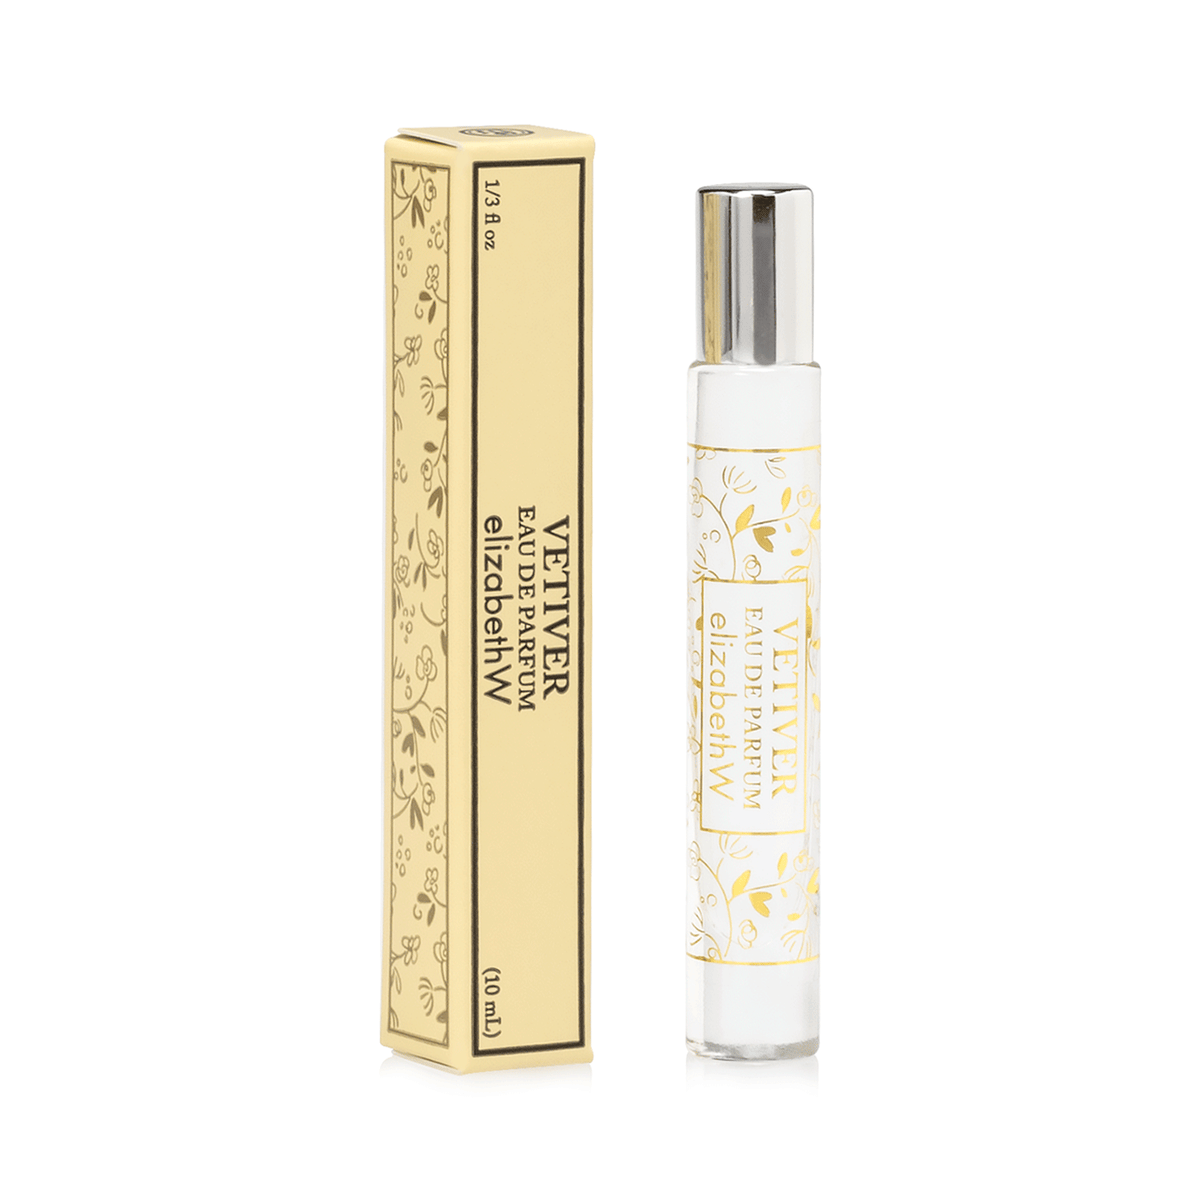 A vetiver perfume in a transparent spray bottle next to its yellow and gold decorative box adorned with floral patterns, displayed on a white background. This Elizabeth W Signature Vetiver Rollerball features.